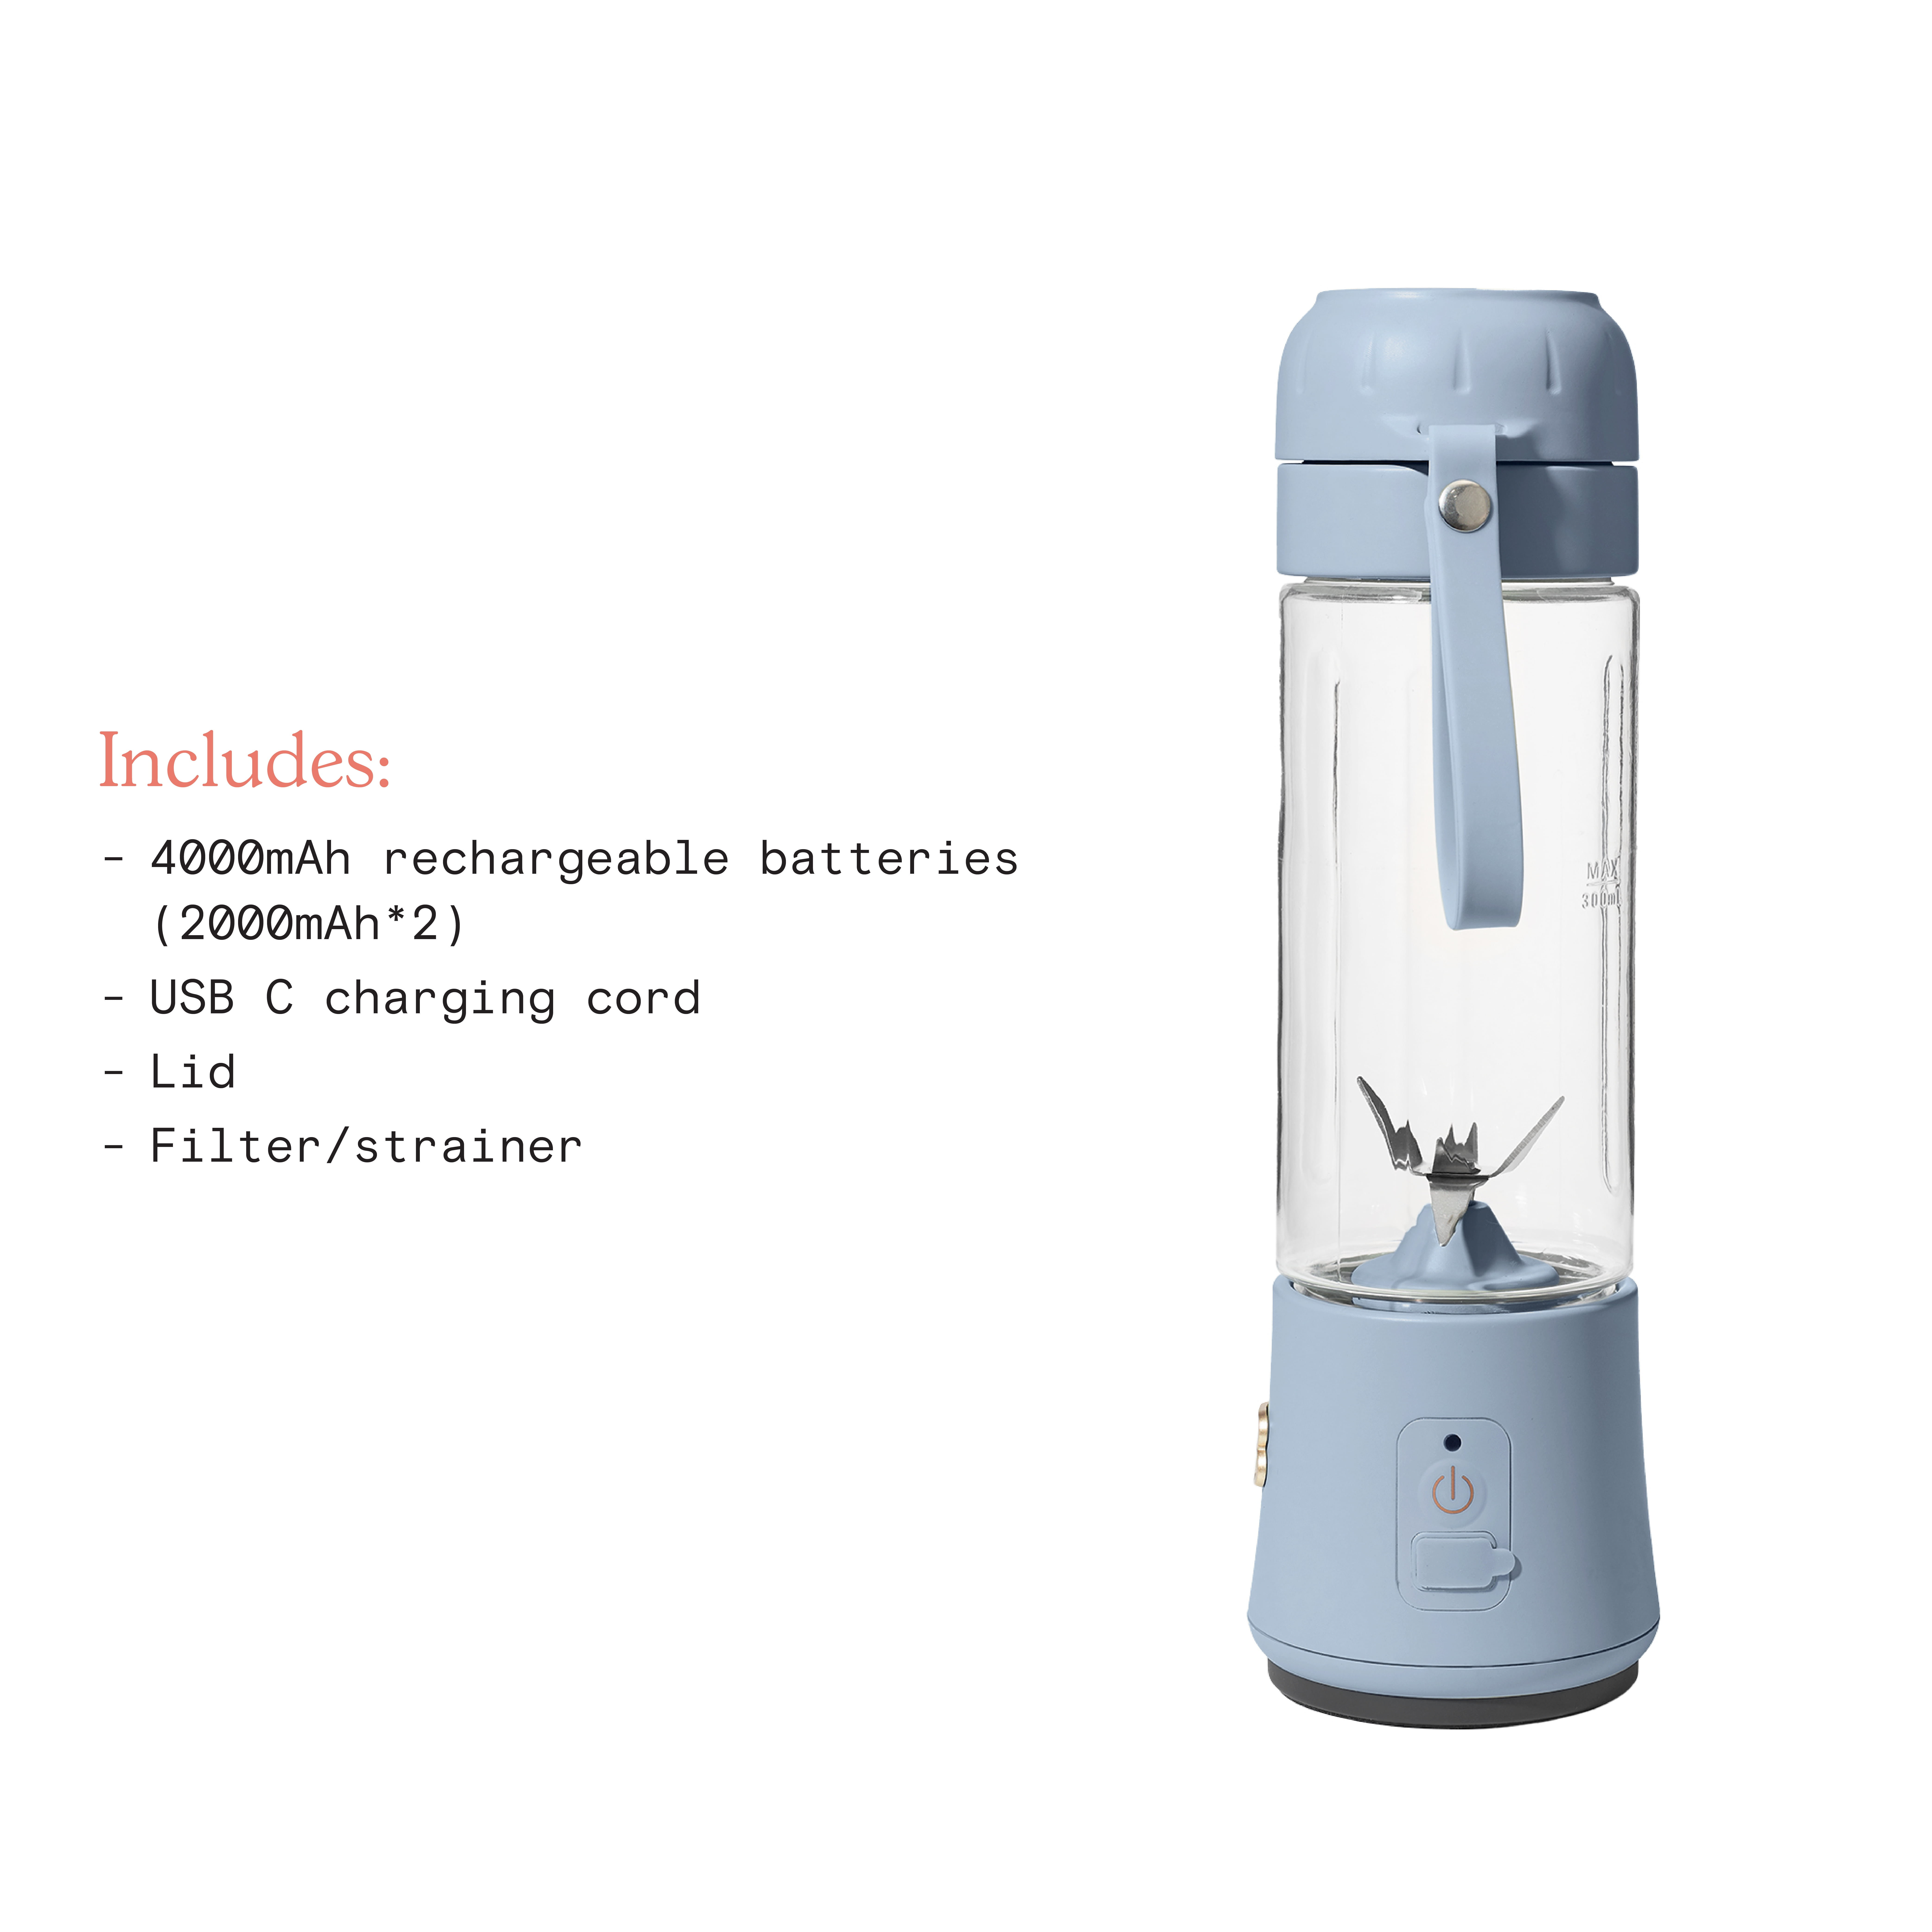 Beautiful Portable Blender by Drew … curated on LTK